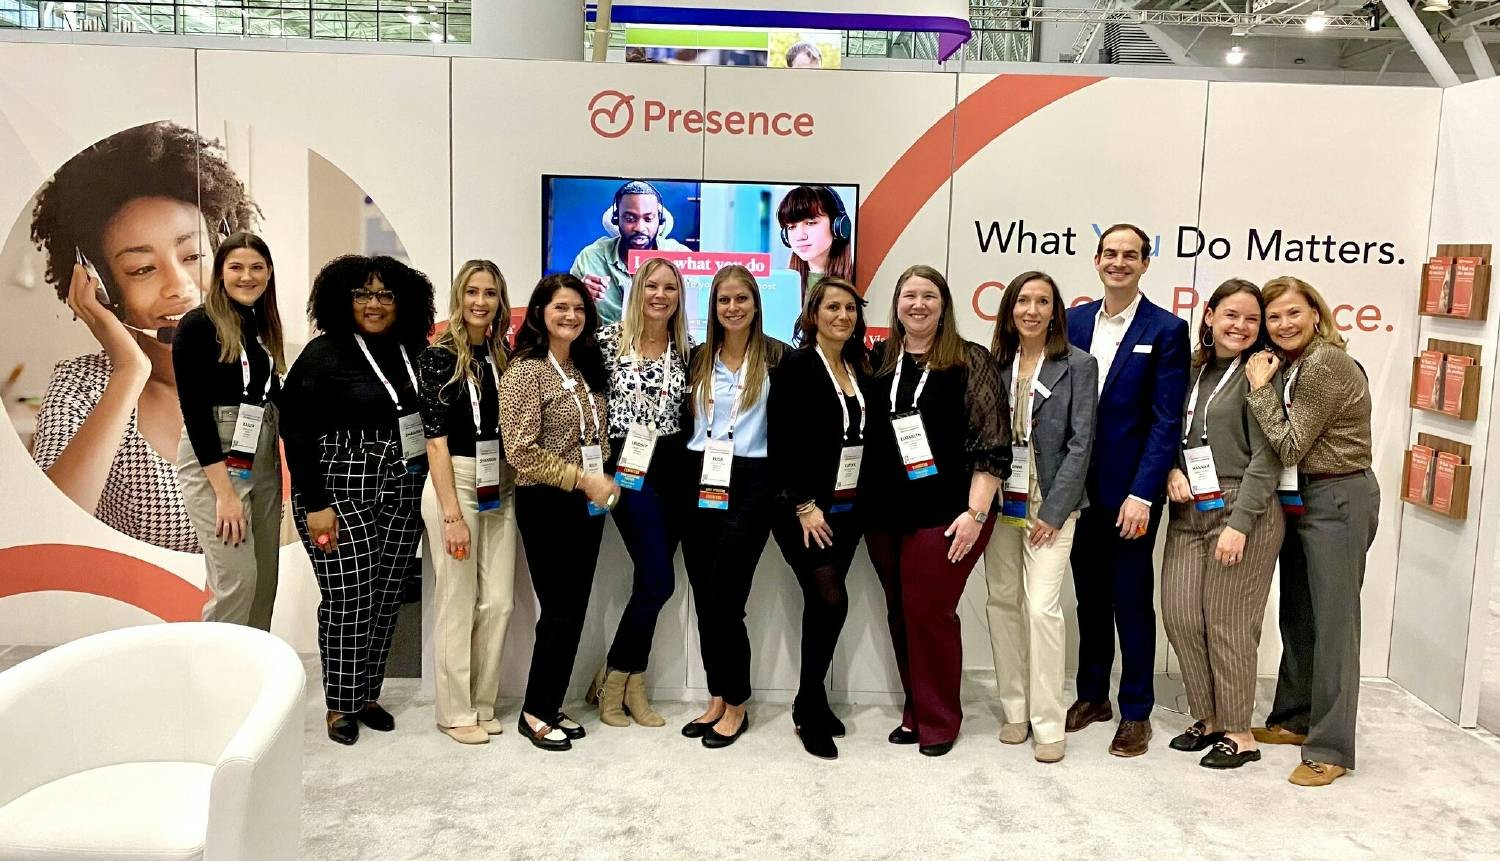 Always a good time to meet and reconnect with clinicians at the annual conference, ASHA. Team Presence 2023!